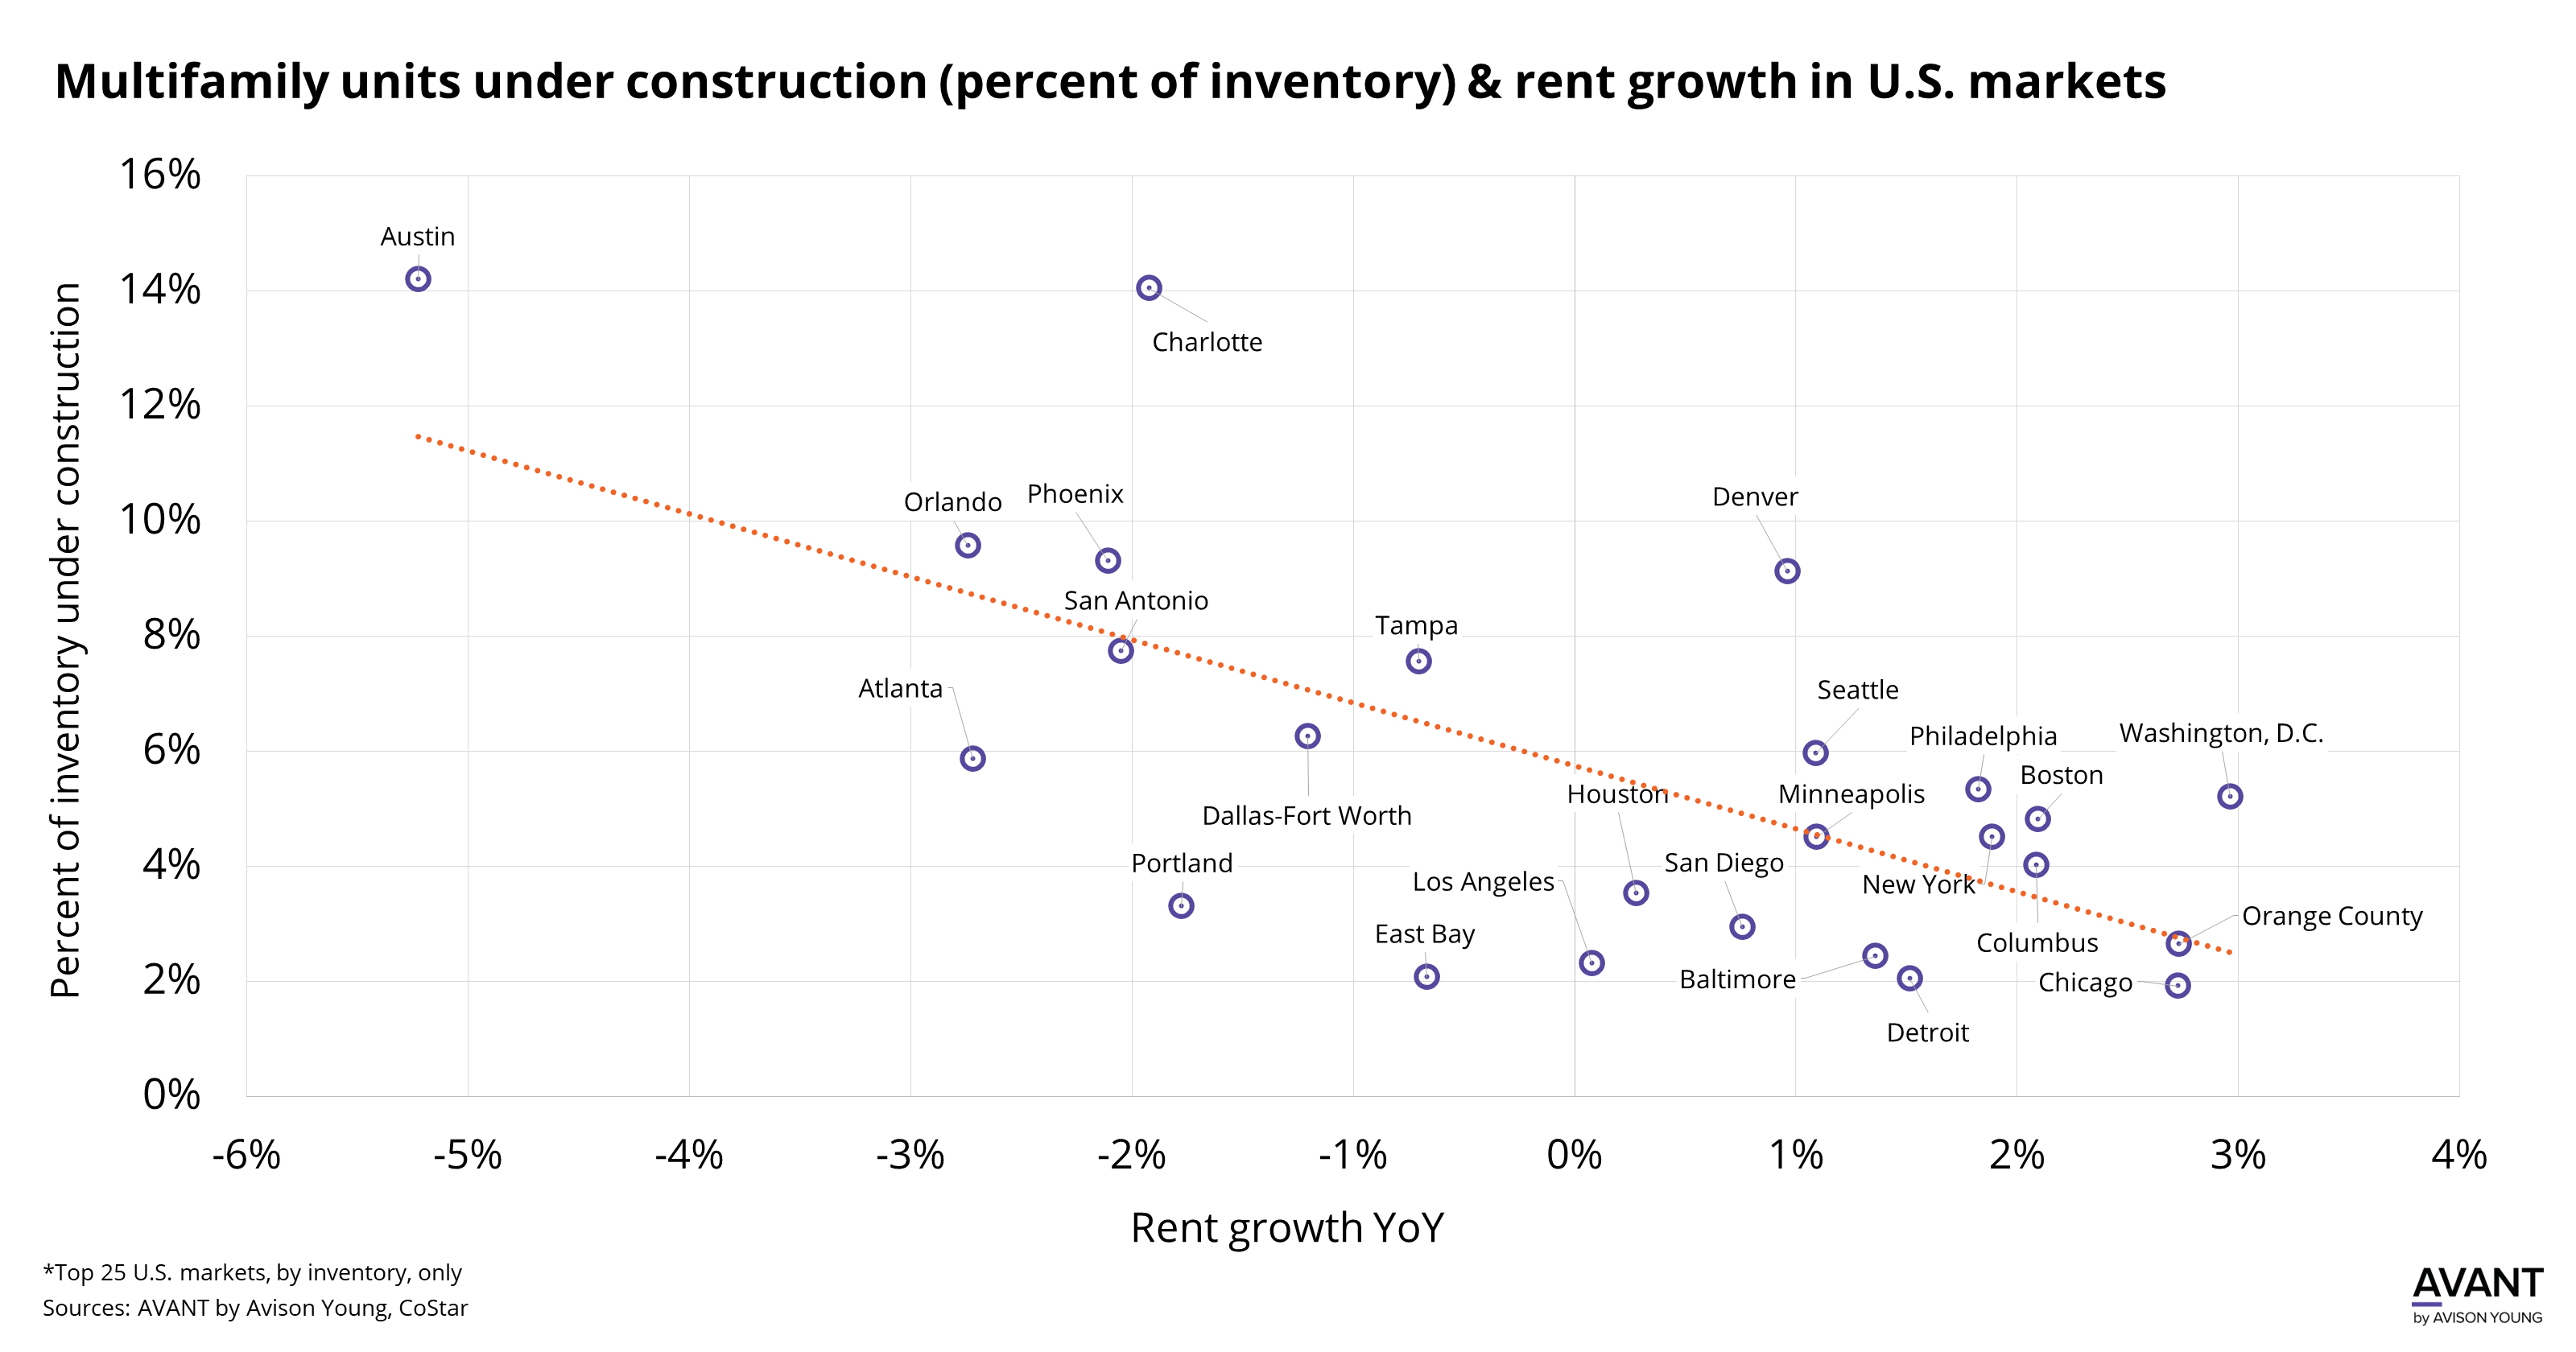 graph of multifamily units under construction compared to rent growth in top 25 U.S. markets